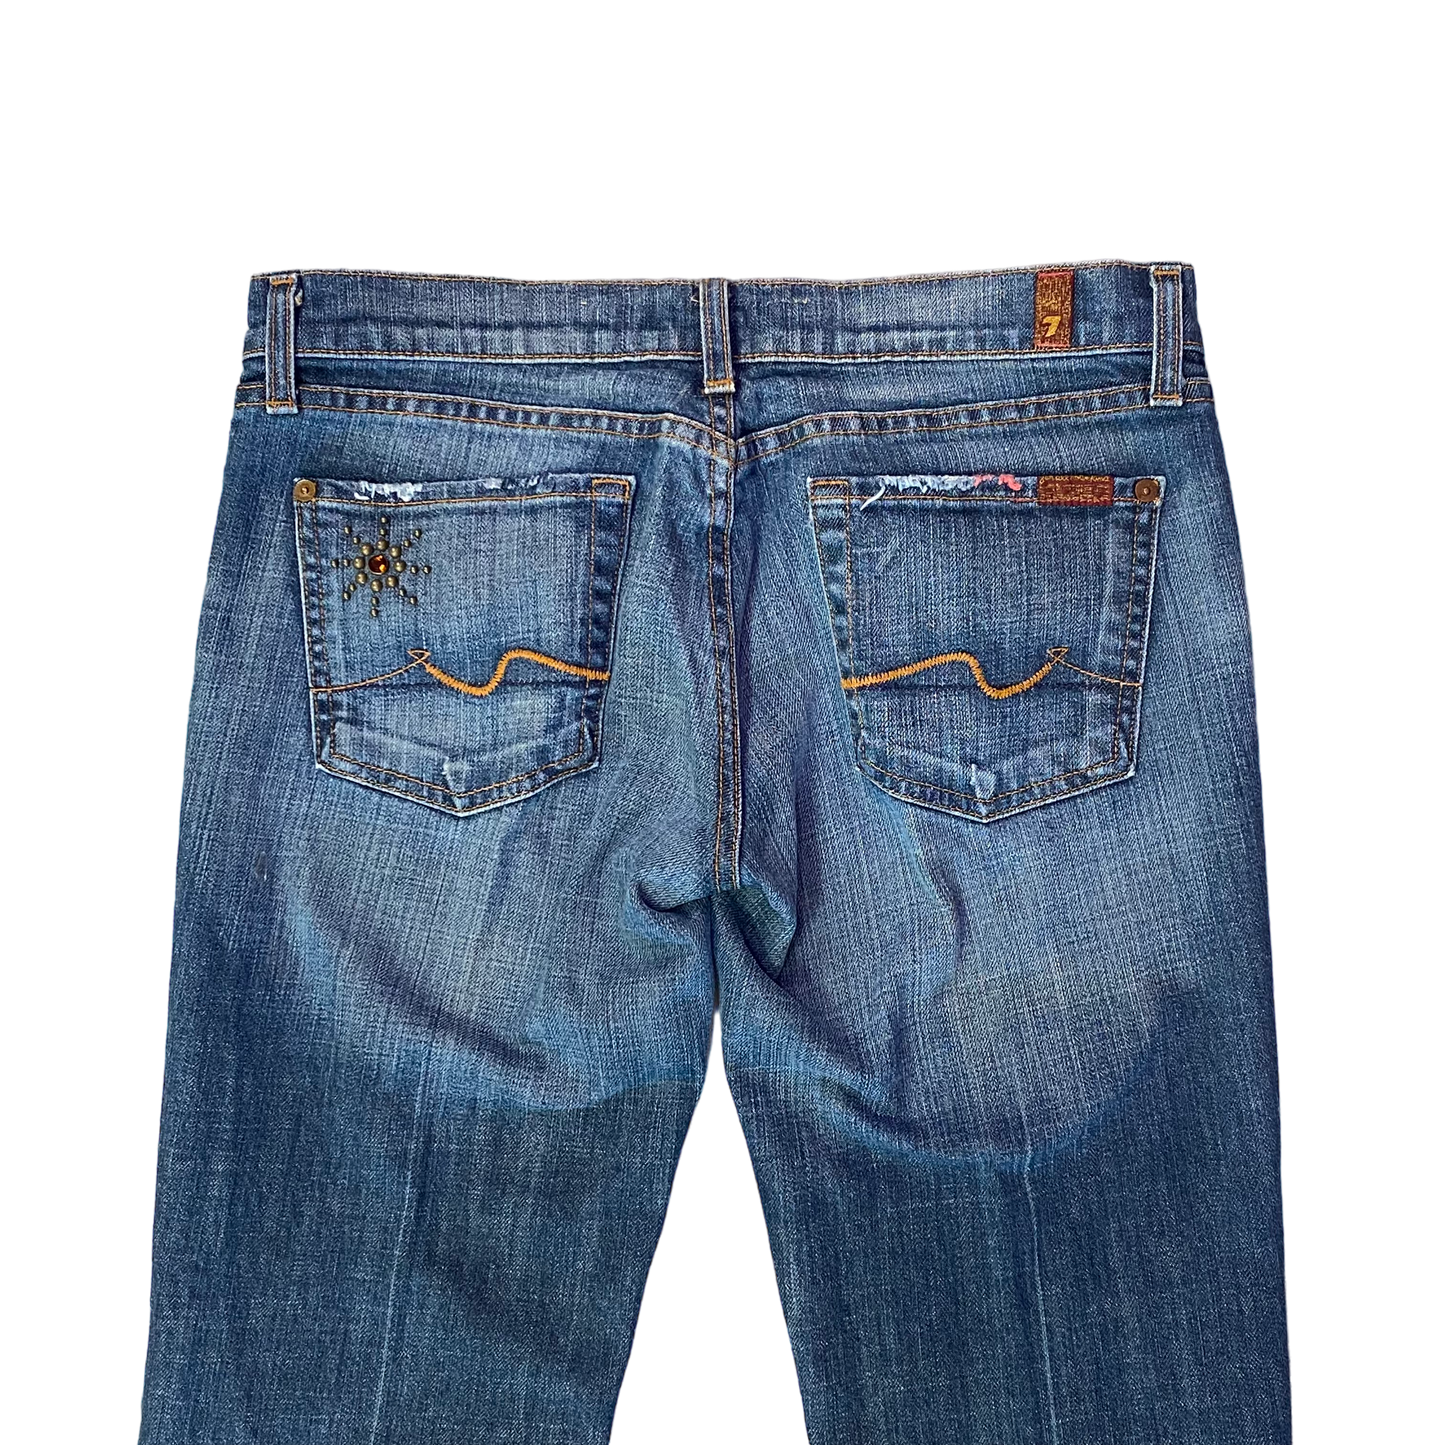 Jeans Designer By 7 For All Mankind  Size: 29